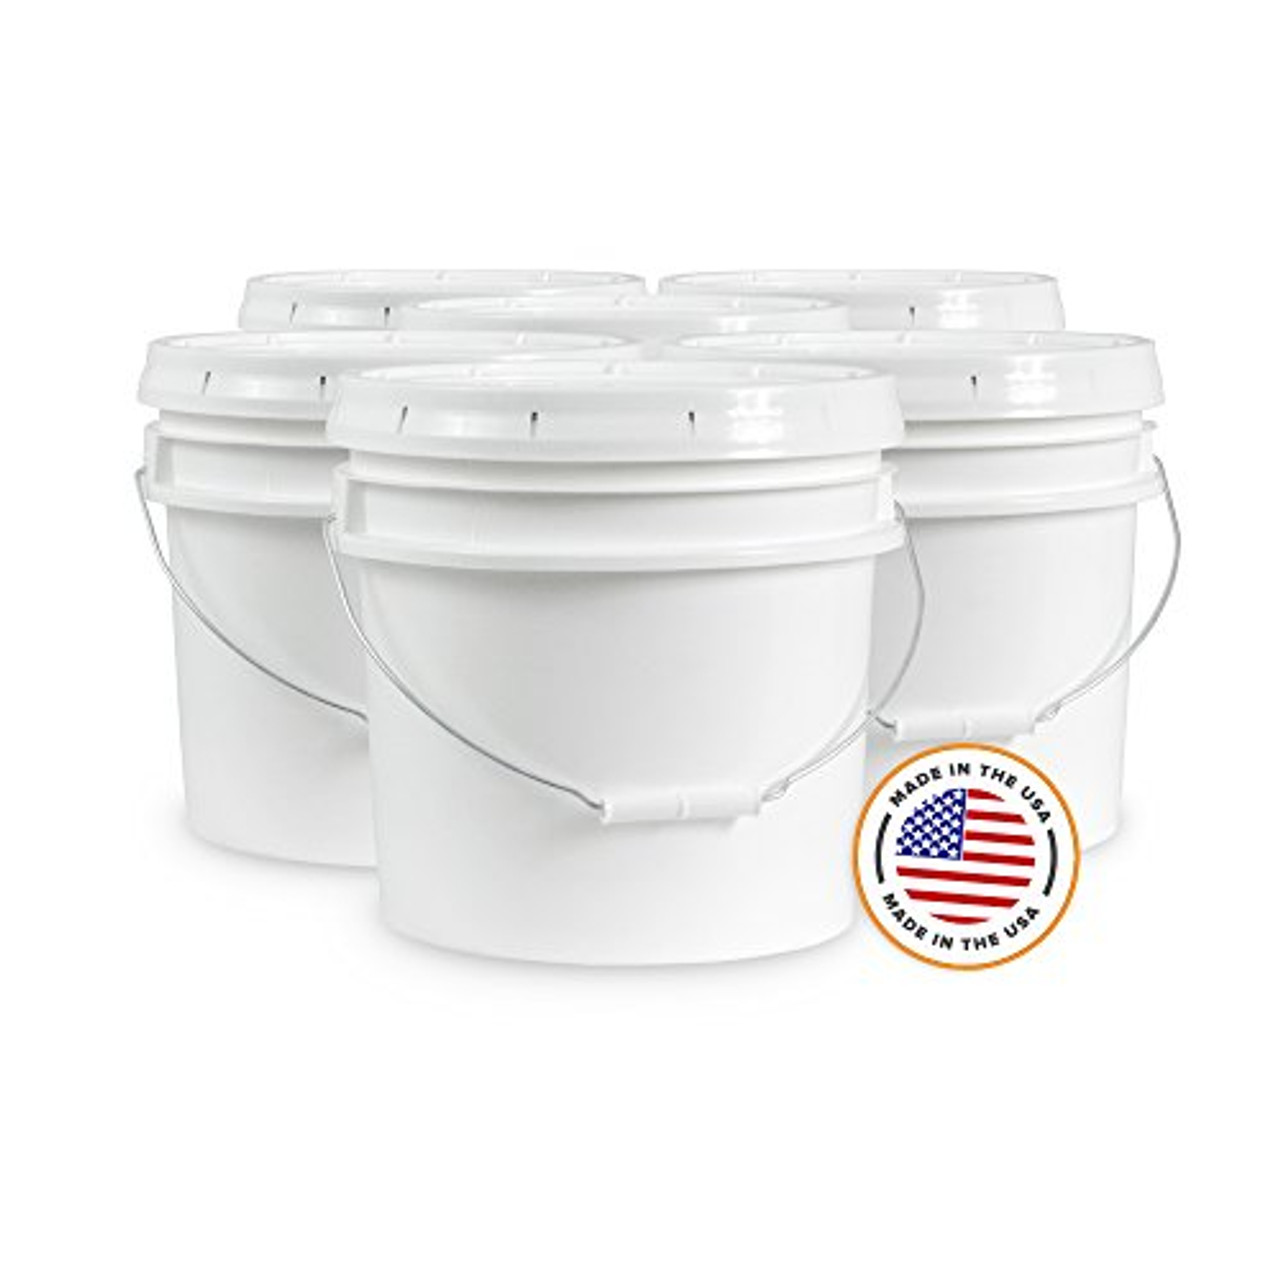 House Naturals 4 Gallon Square Food Grade Bucket Pail with Plastic Handles  and Lid (Pack of 3) Made in USA containers (Black)